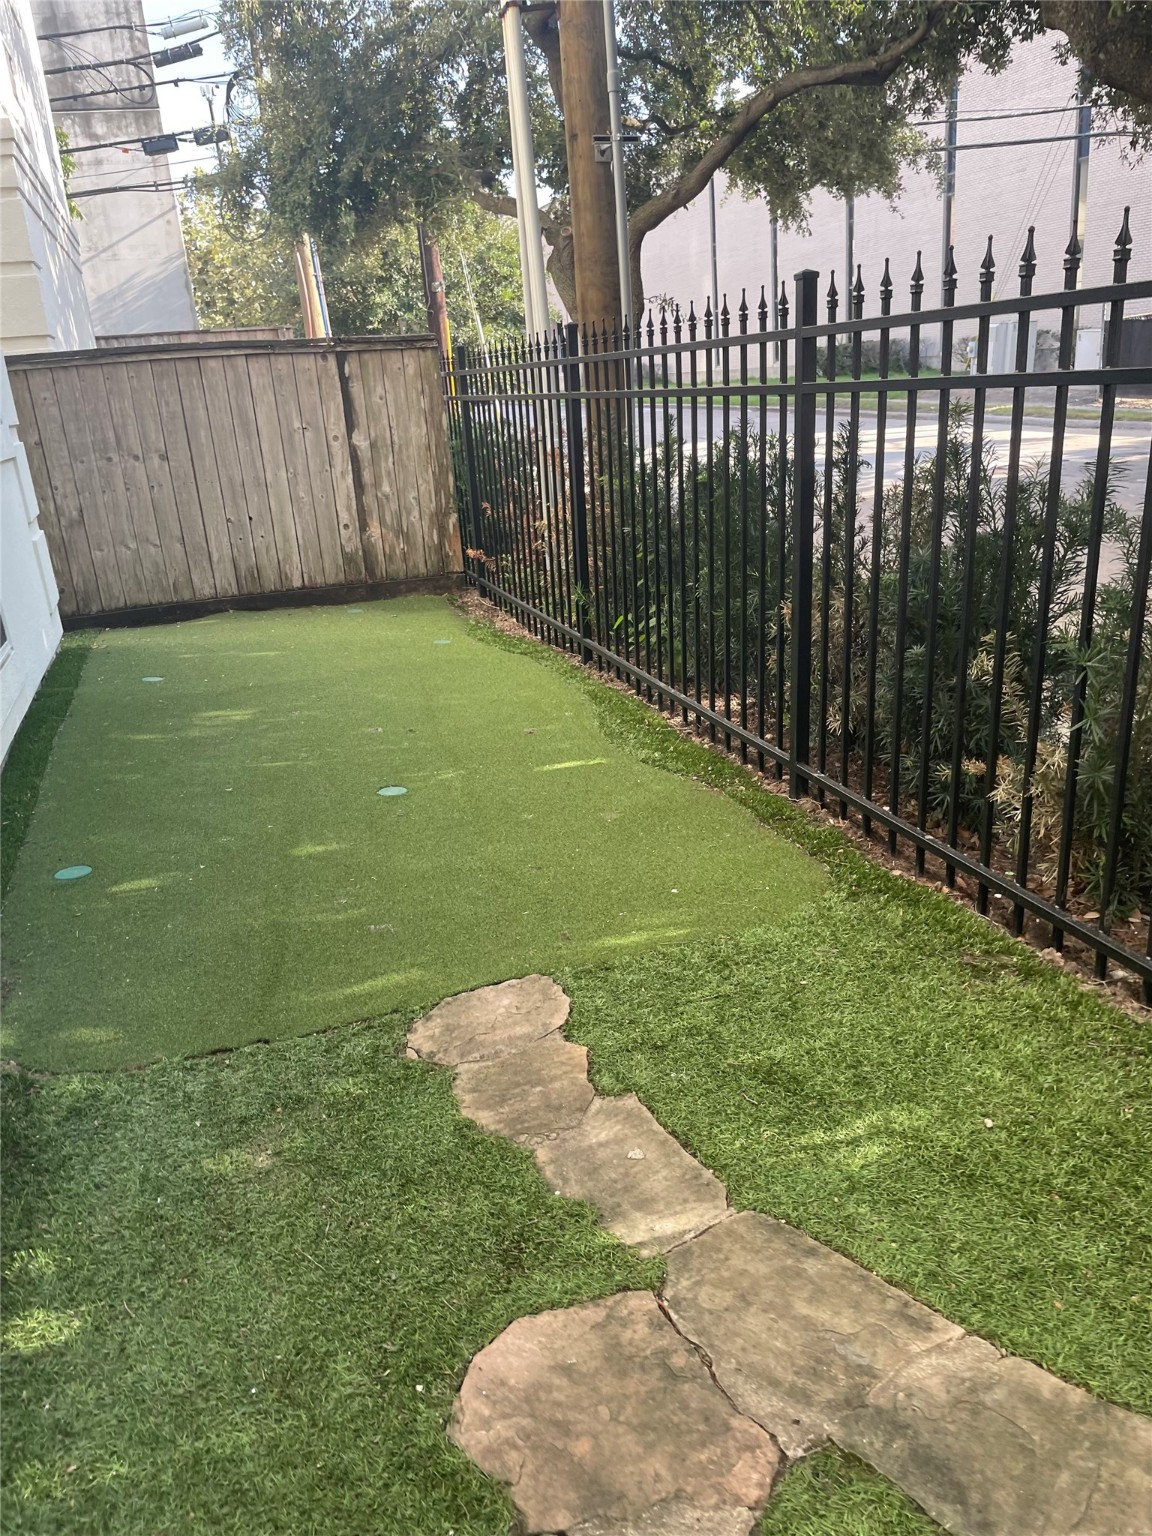 The backyard is a putting green!